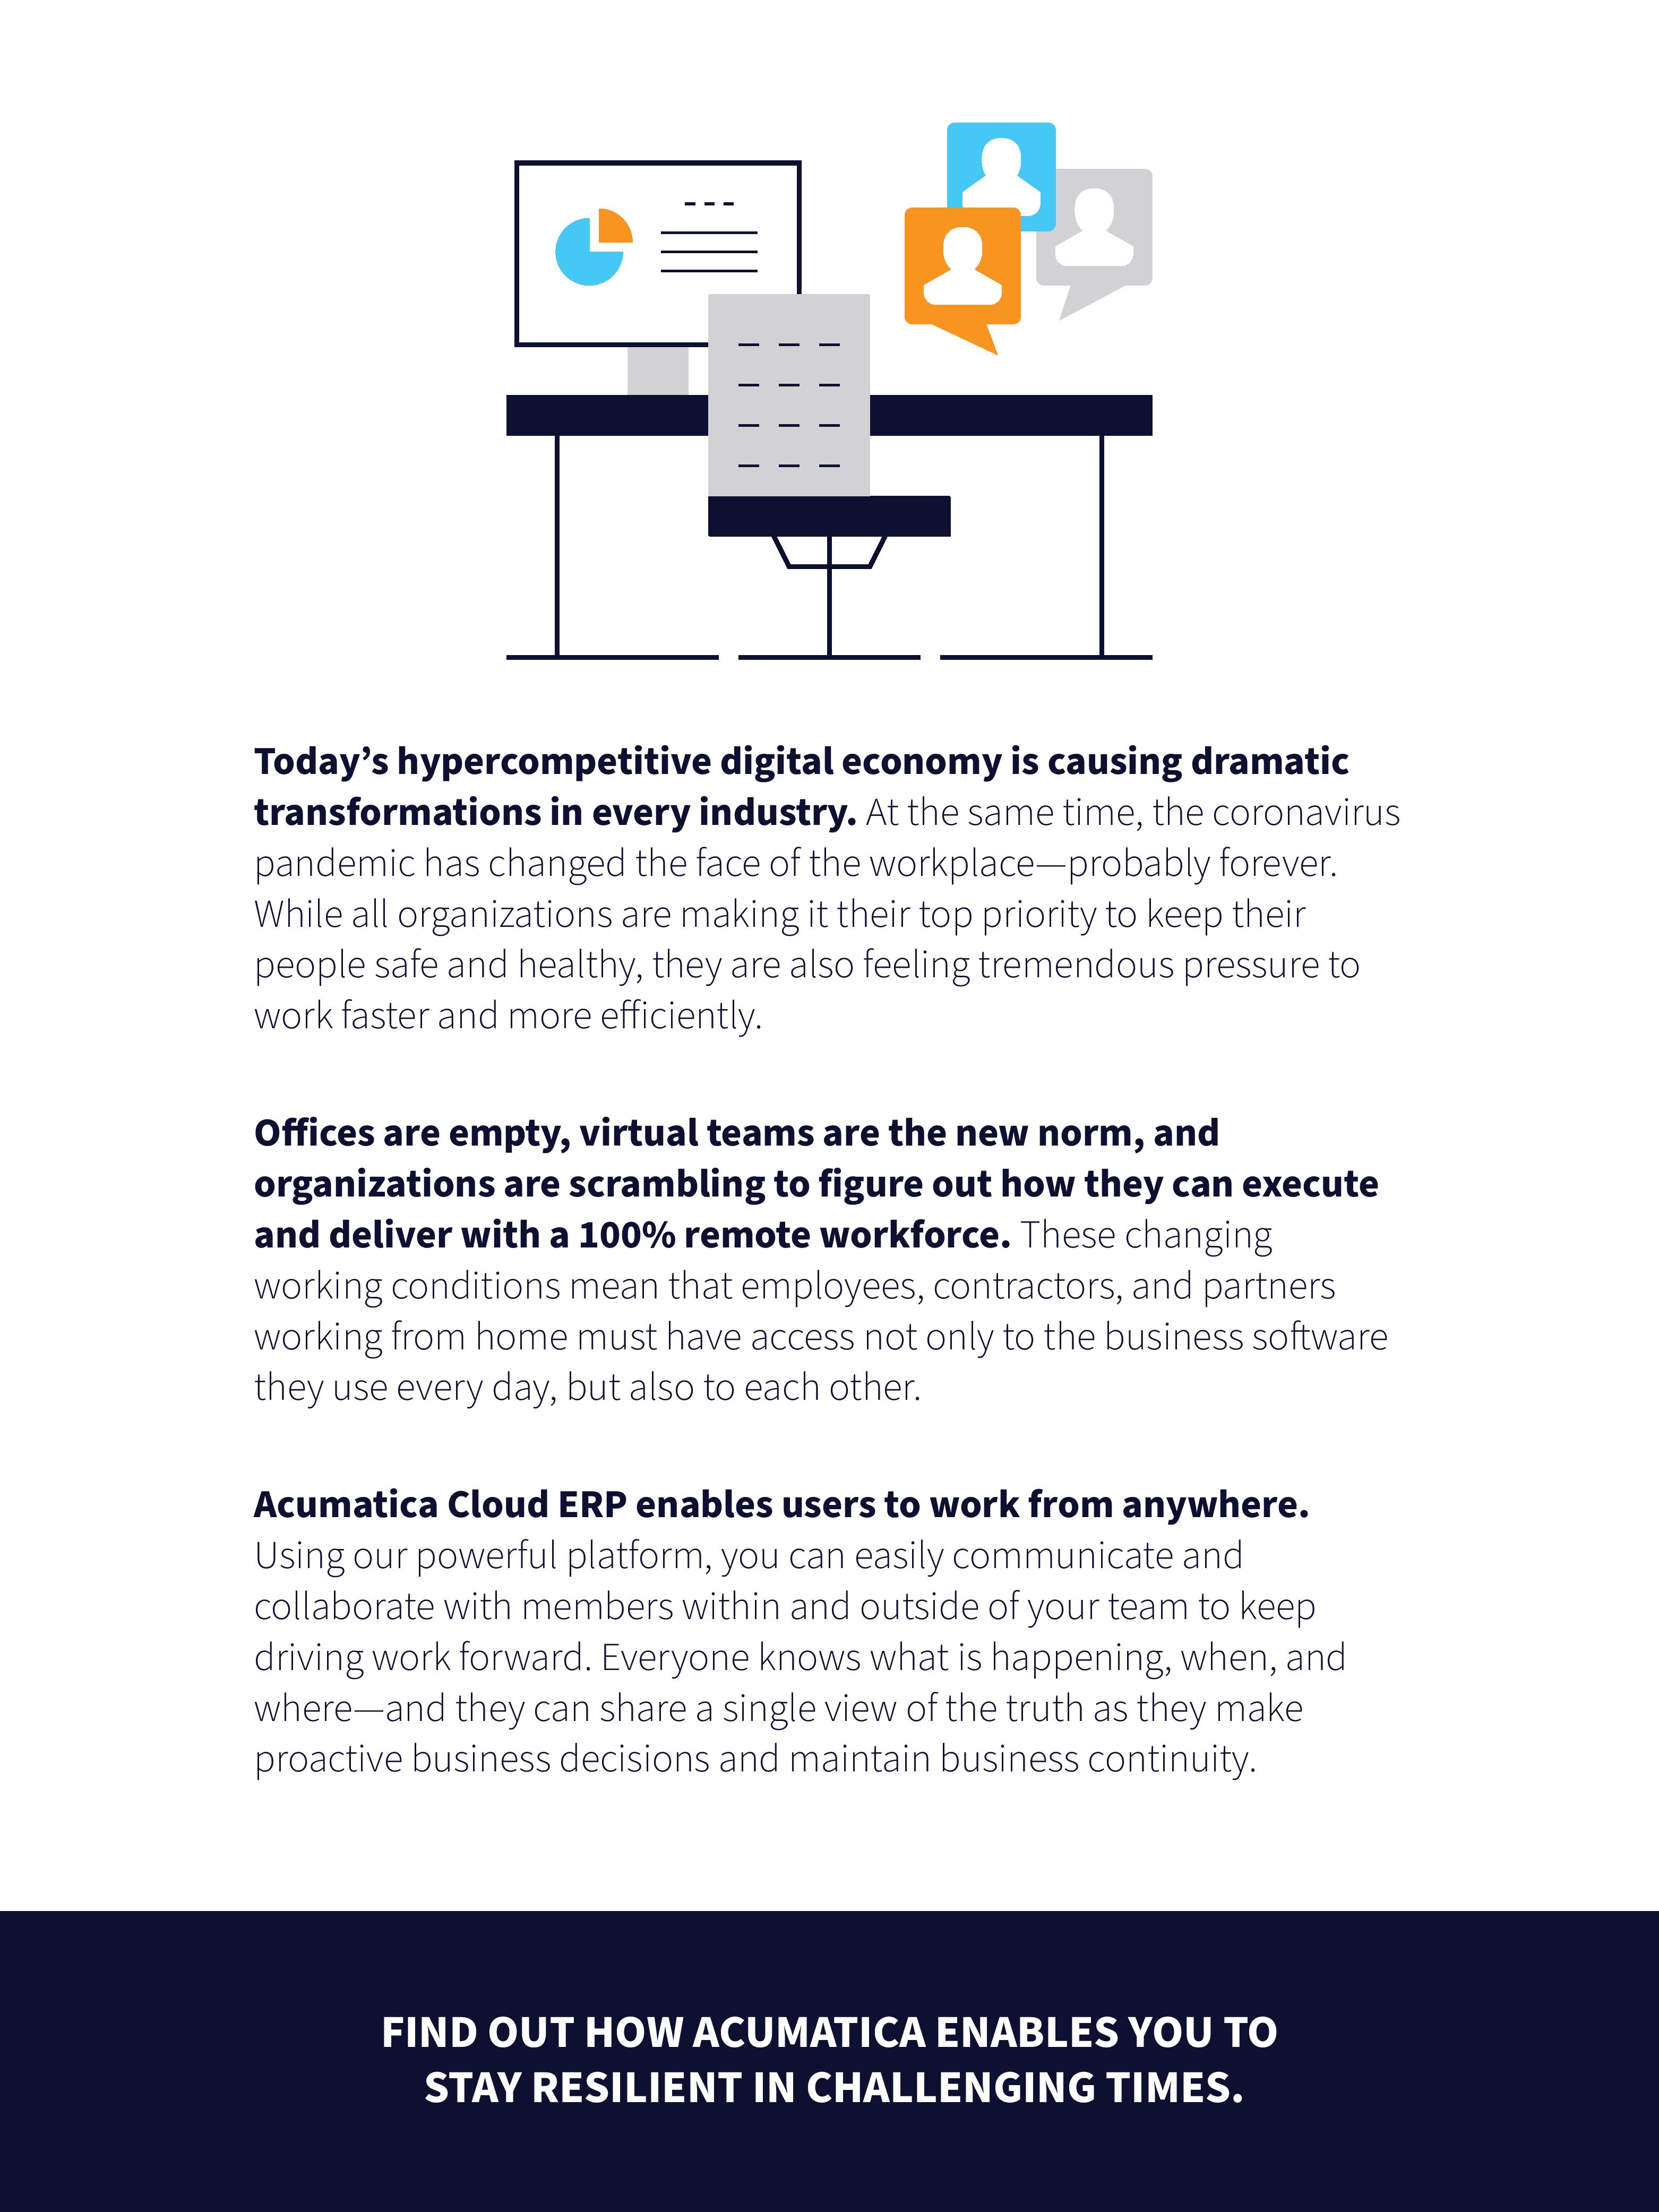 Execute and Deliver with a 100% Remote Workforce, page 1